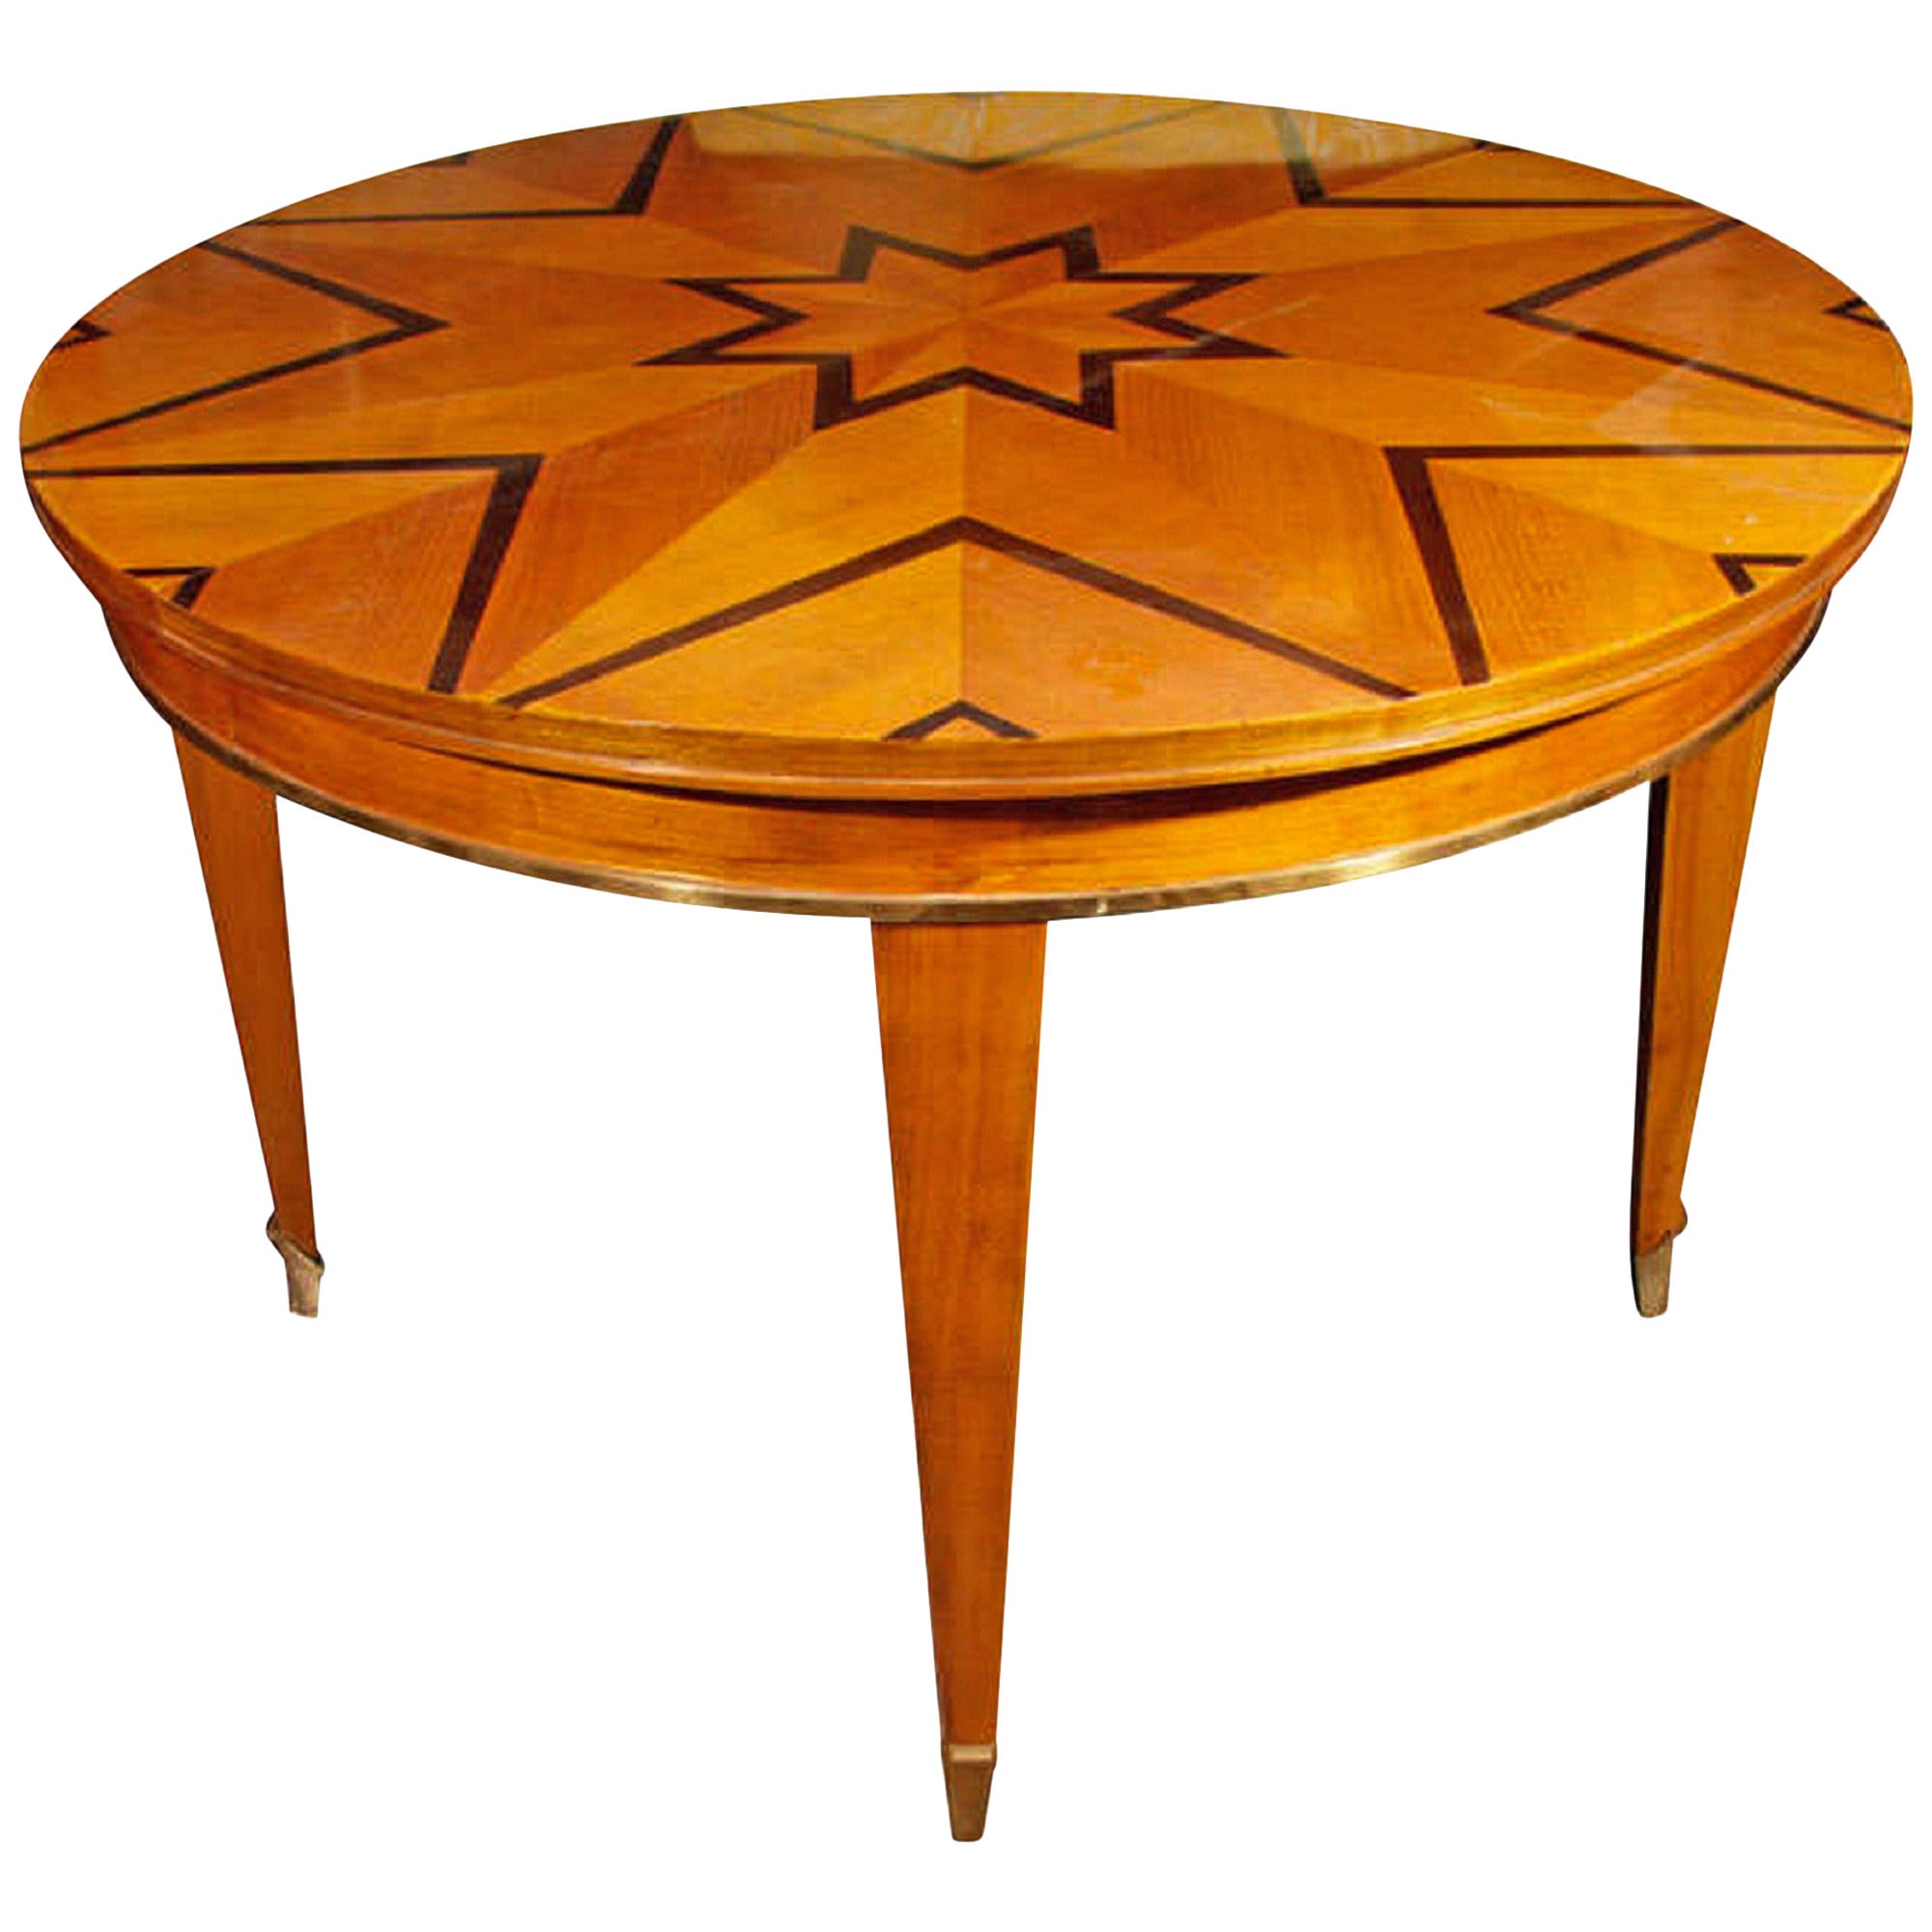 Center Table with Inlaid Starburst Pattern by Dominique, French, 1930s